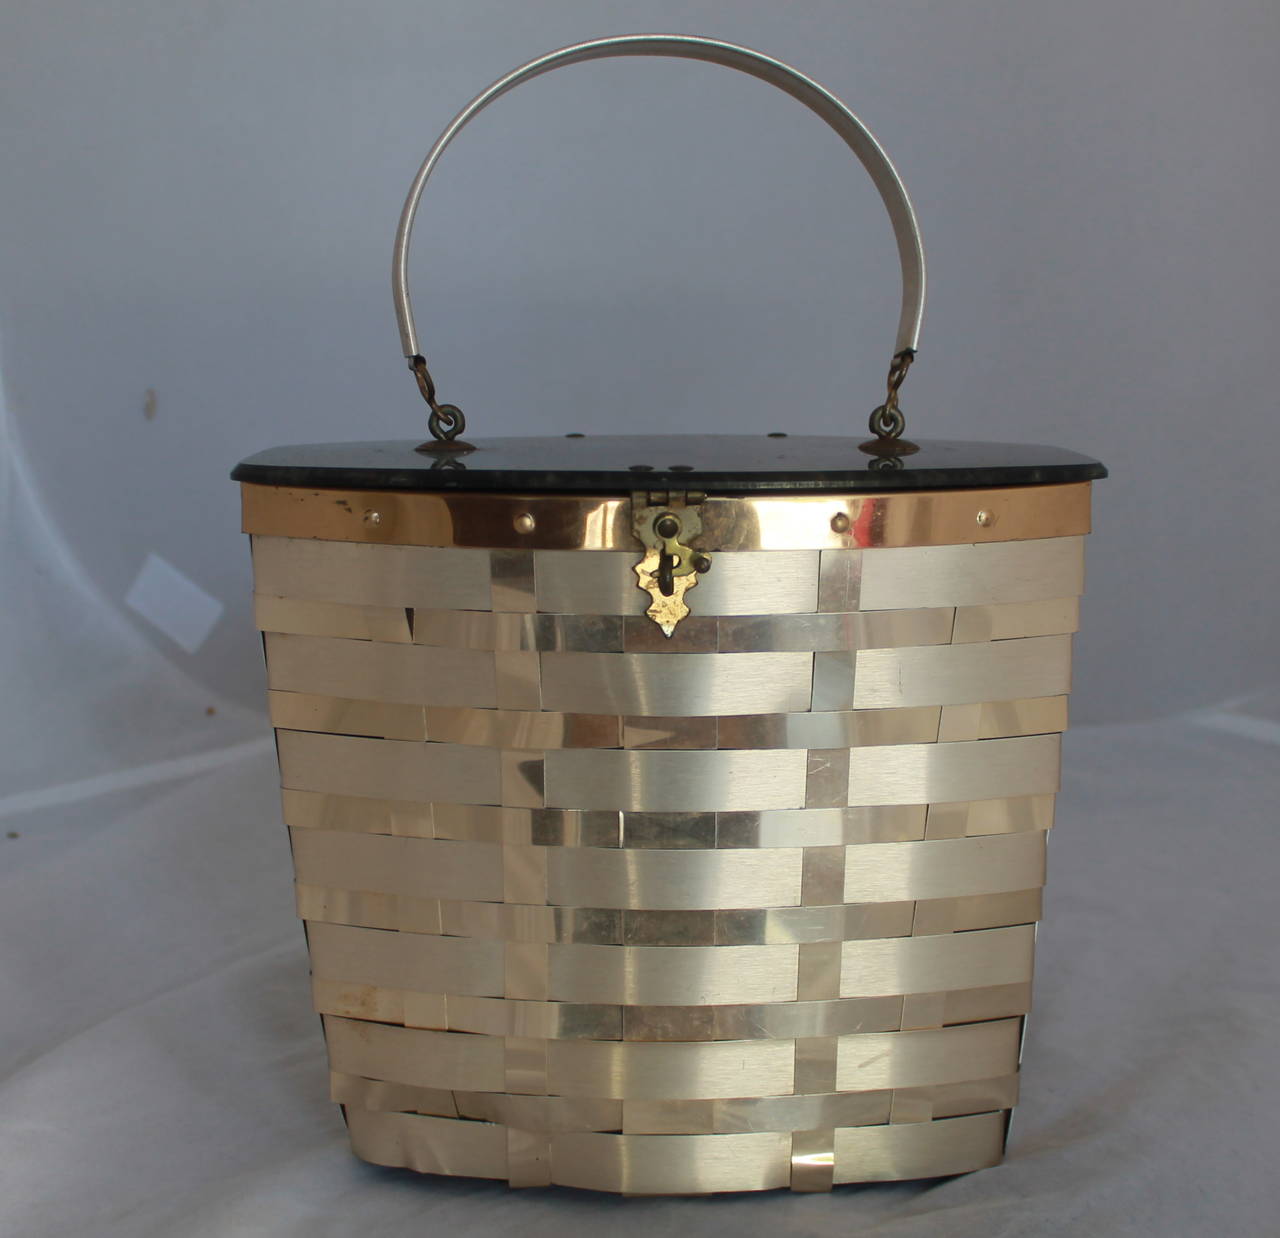 Goldstrom 1950s Vintage Goldtone Basket Weave with Grey Marbleized Top Bag. This bag is in fair vintage condition with wear consistent with its age. The inside has visible wear and there is some wear on the outside.

Measurements:
Height-